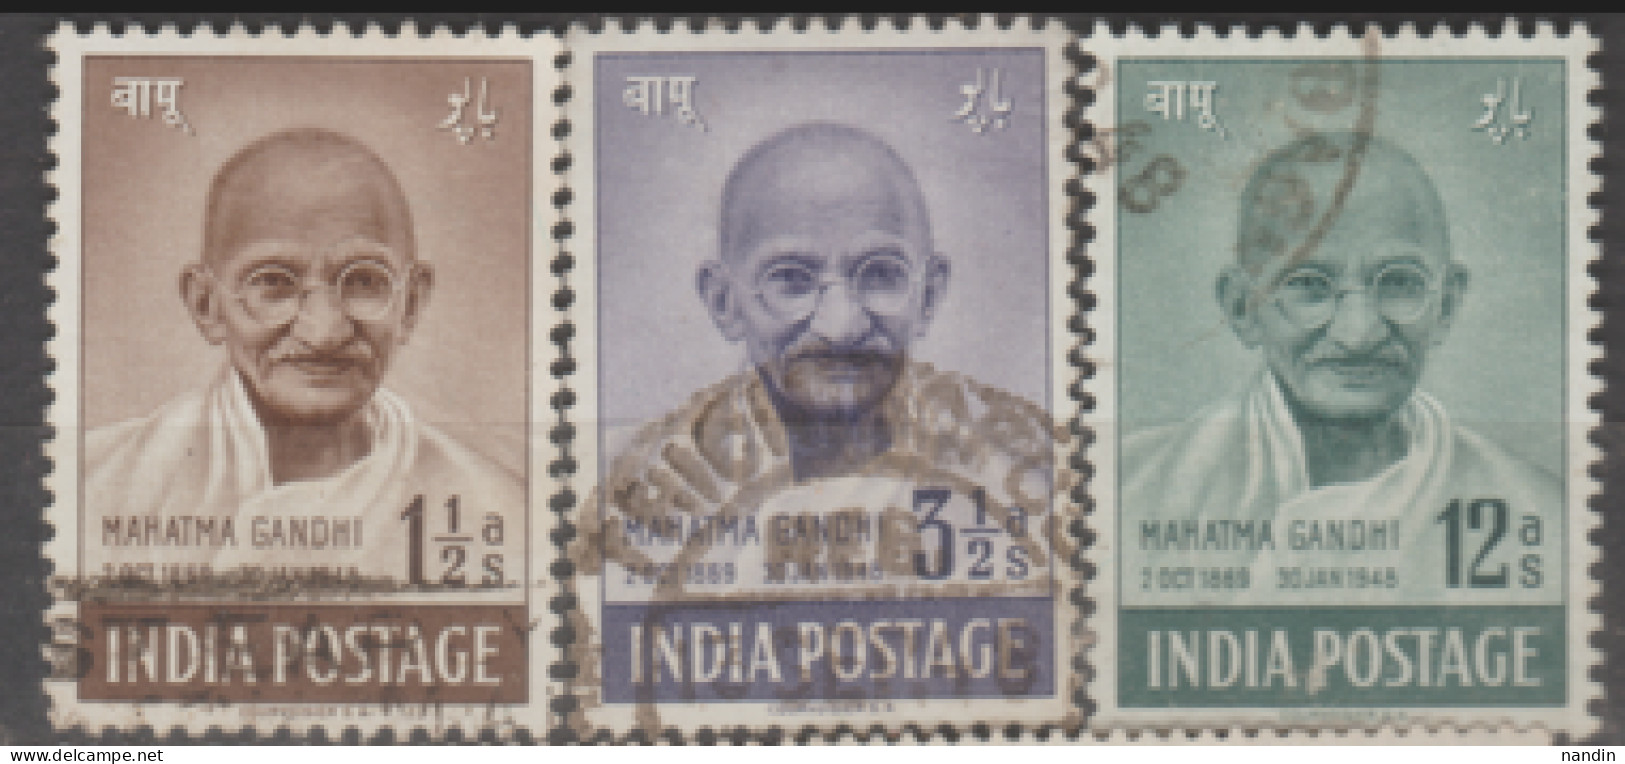 USED STAMP FROM 1948 INDIA ON GANDHI ON 1ST ANNEVERSARY OF INDEPENDENT(15TH AUG 1948) - Oblitérés